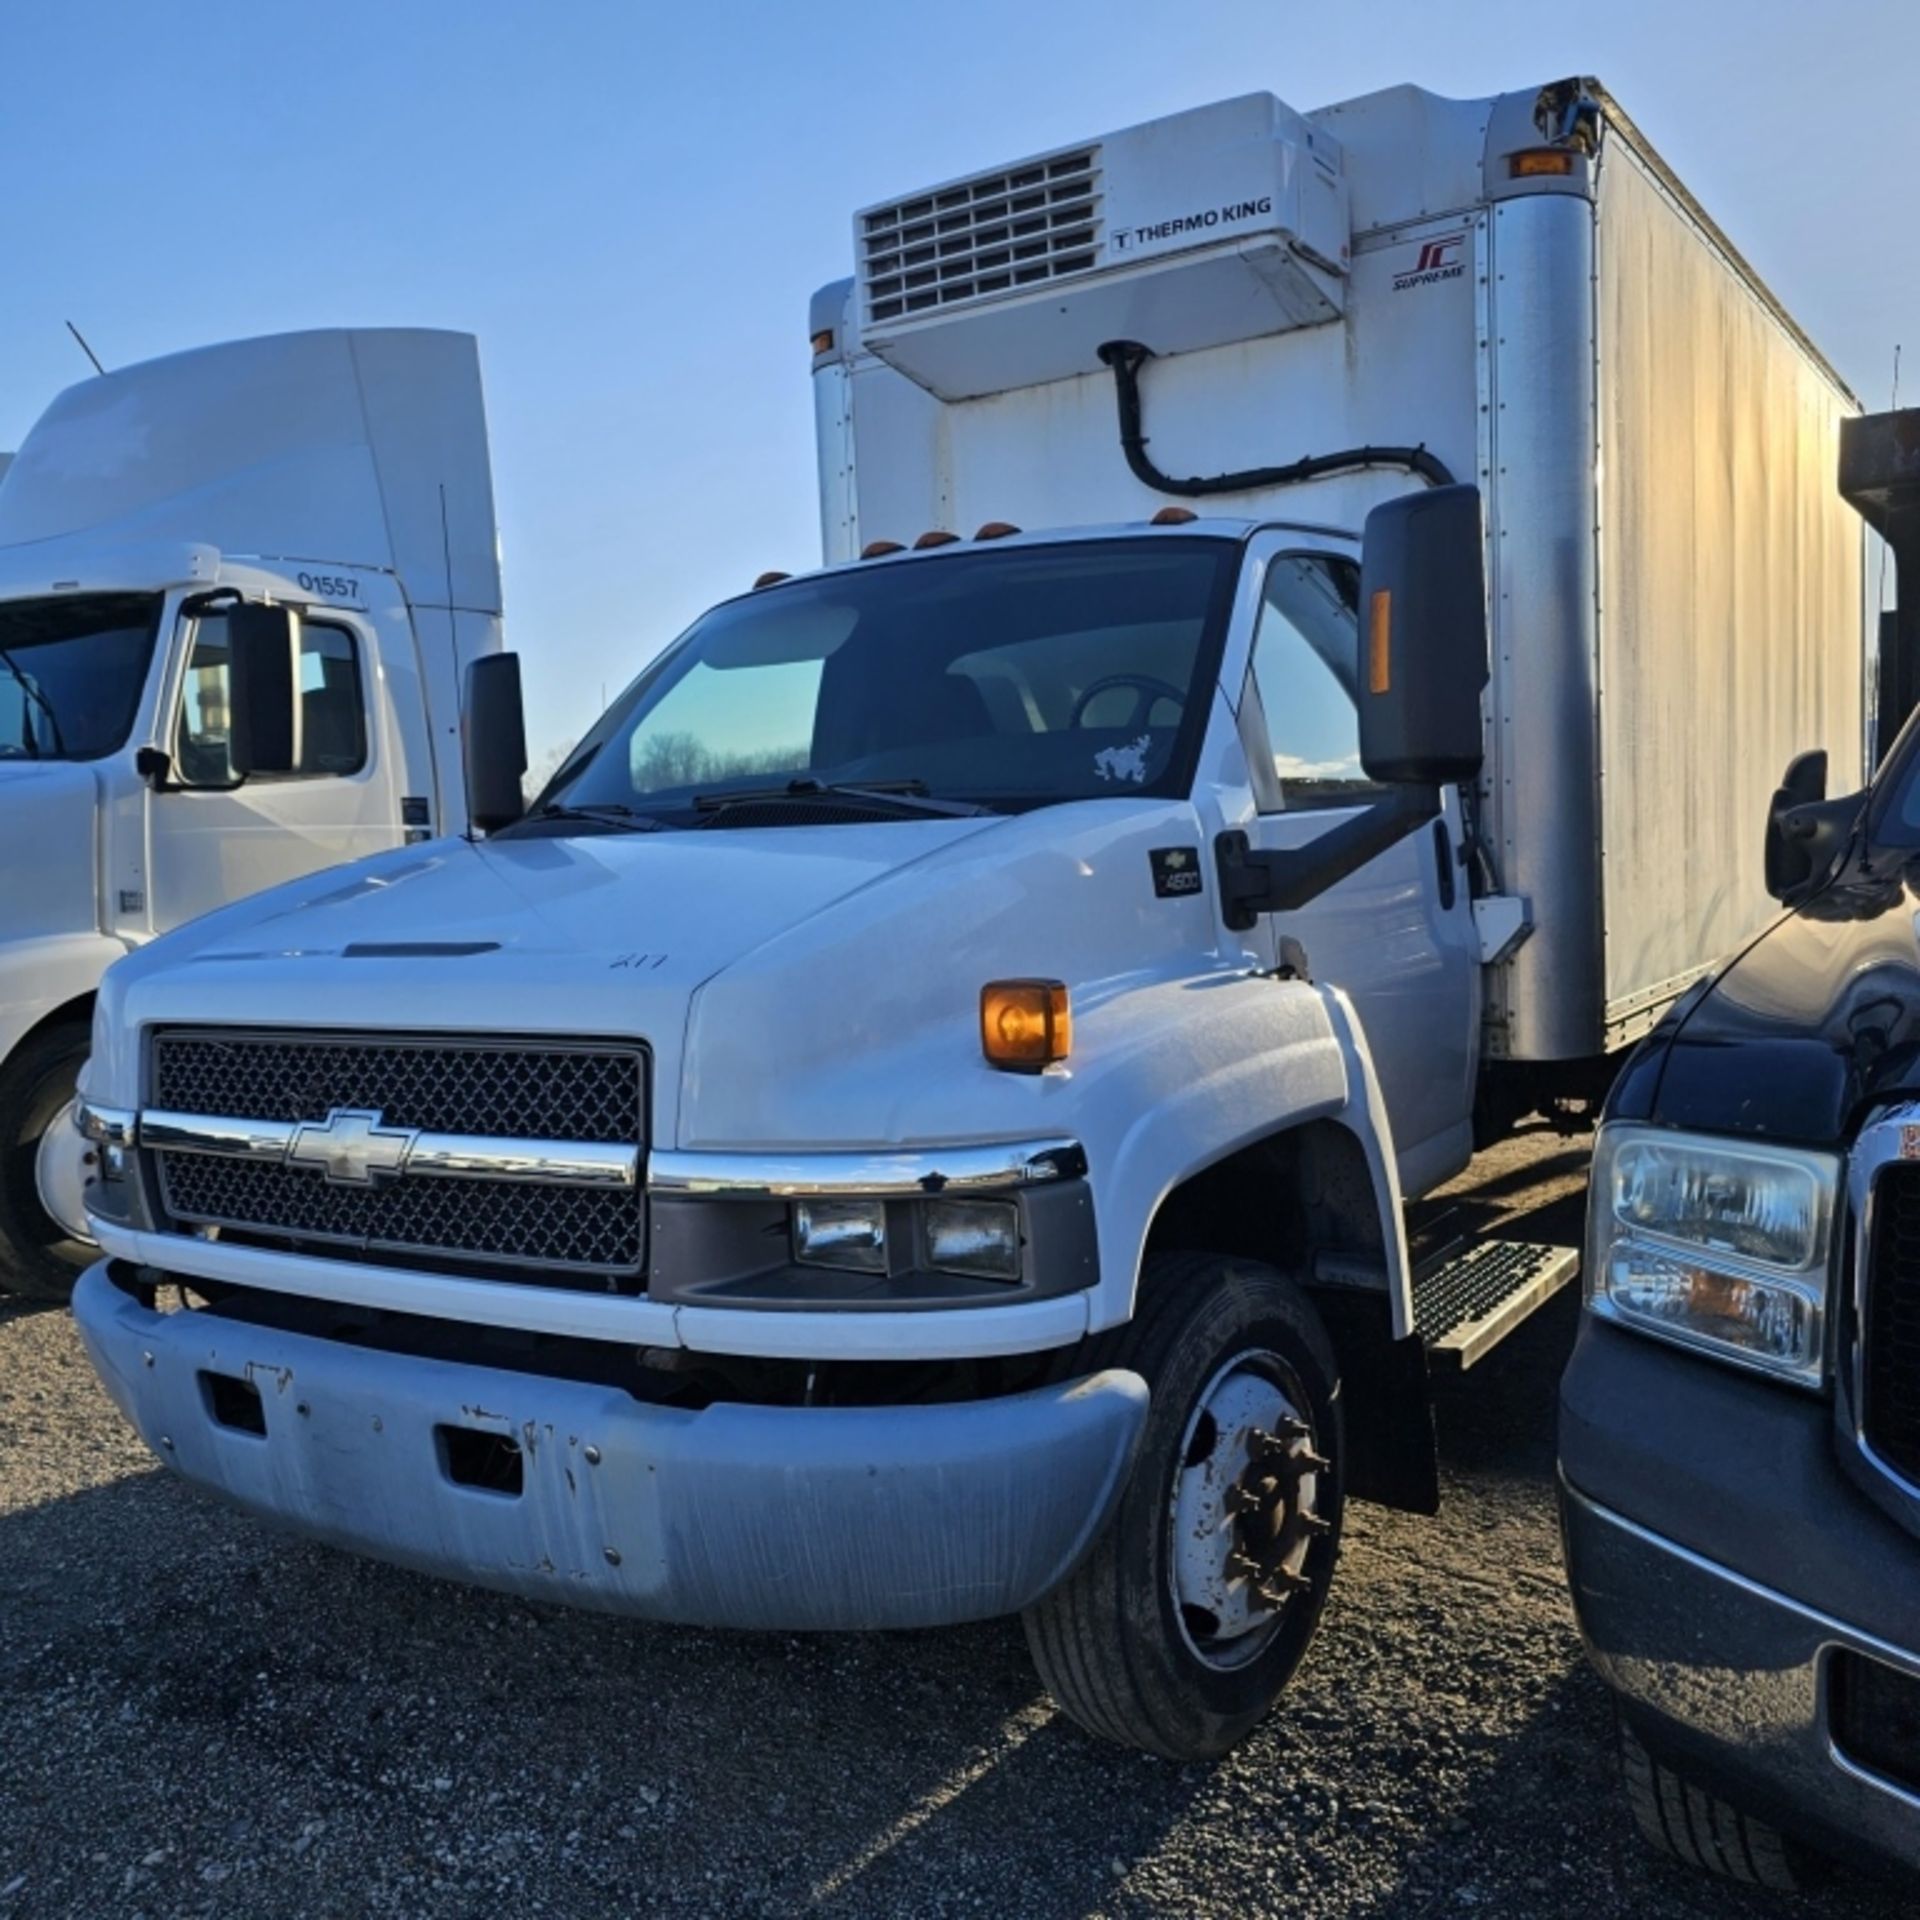 2009 Chevy C4500 Reefer Box Truck - Image 3 of 9